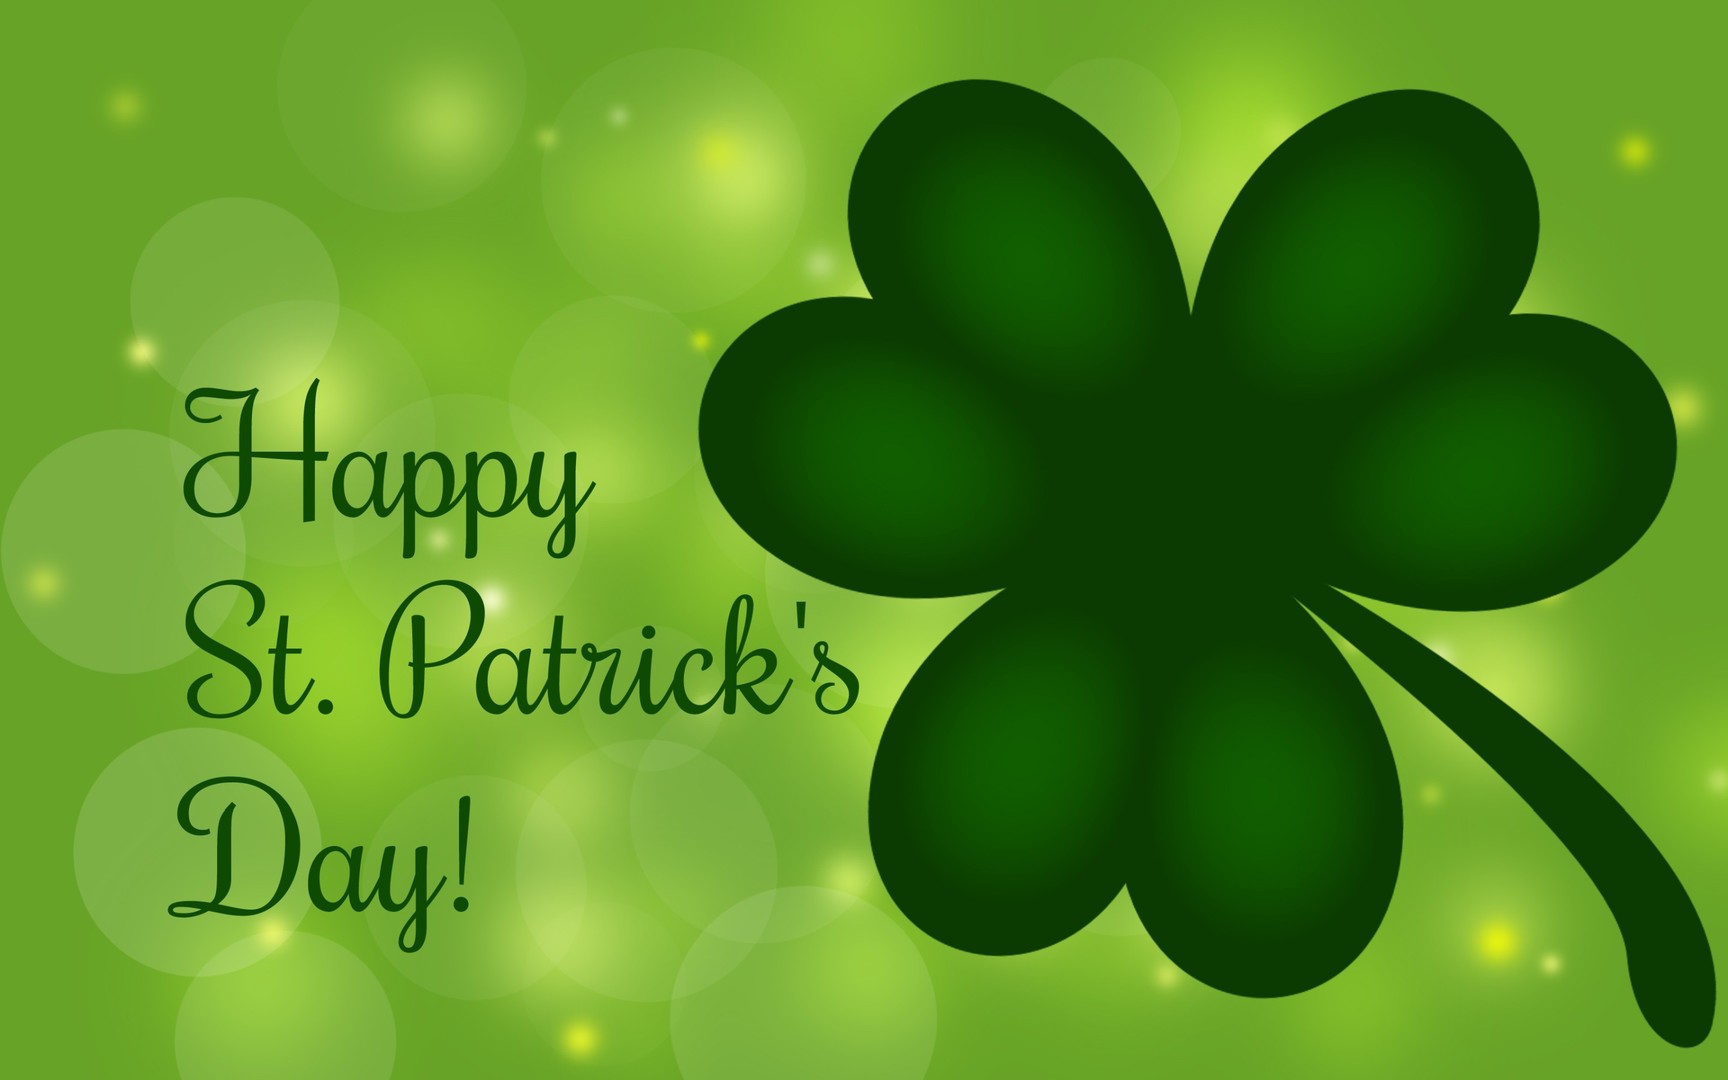 Happy Stpatricks Day Wallpaper Free Vector And Graphic 53049186